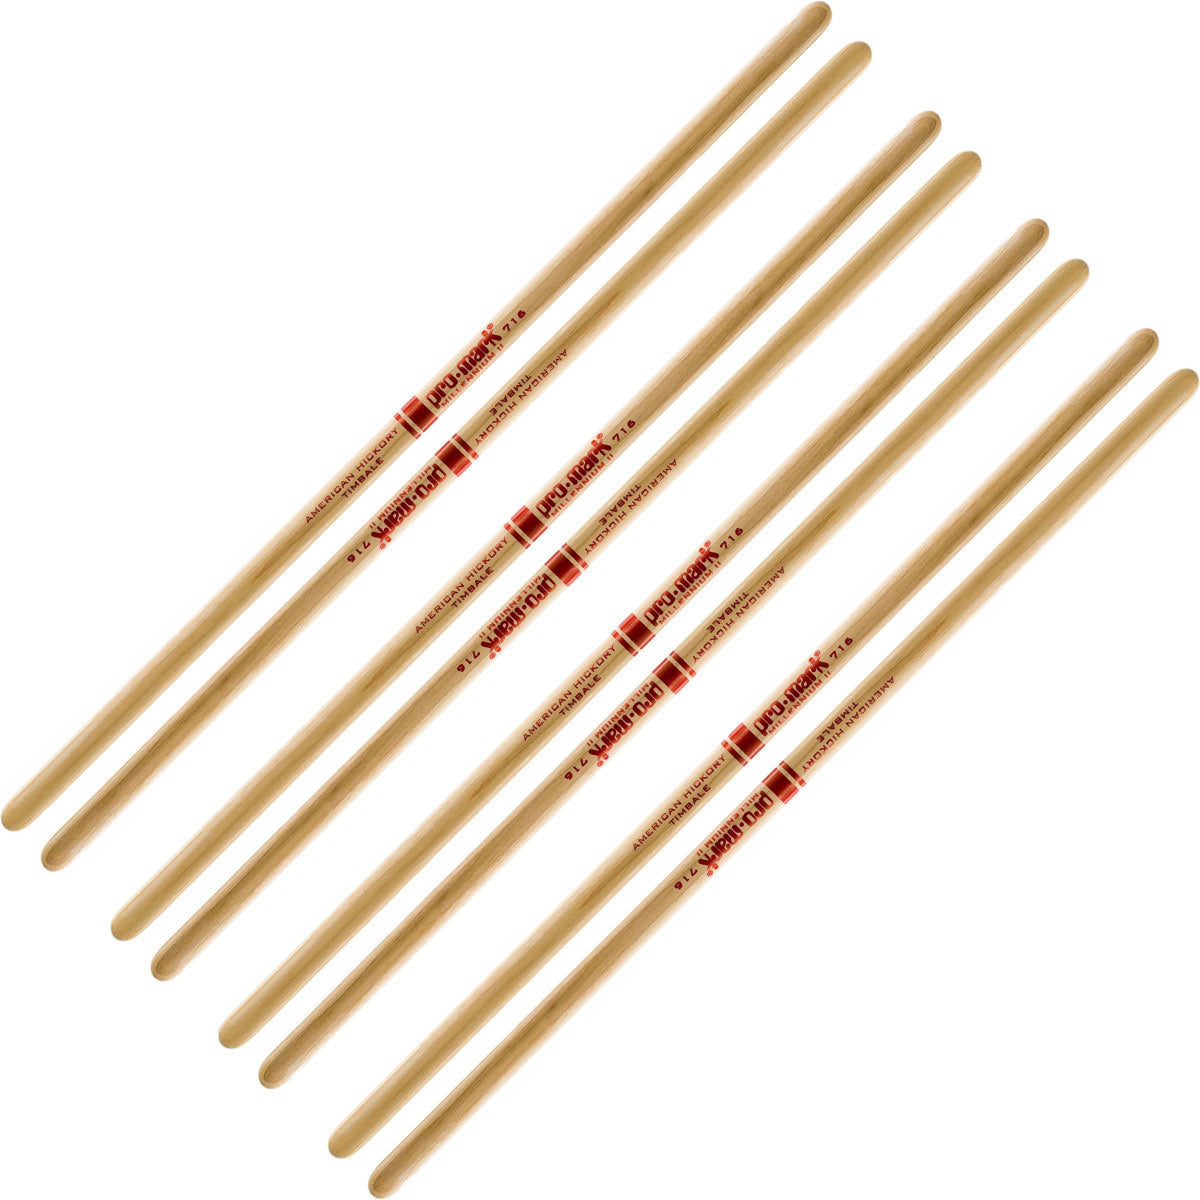 Promark TH716 Timbale Drumsticks - 4 Pairs